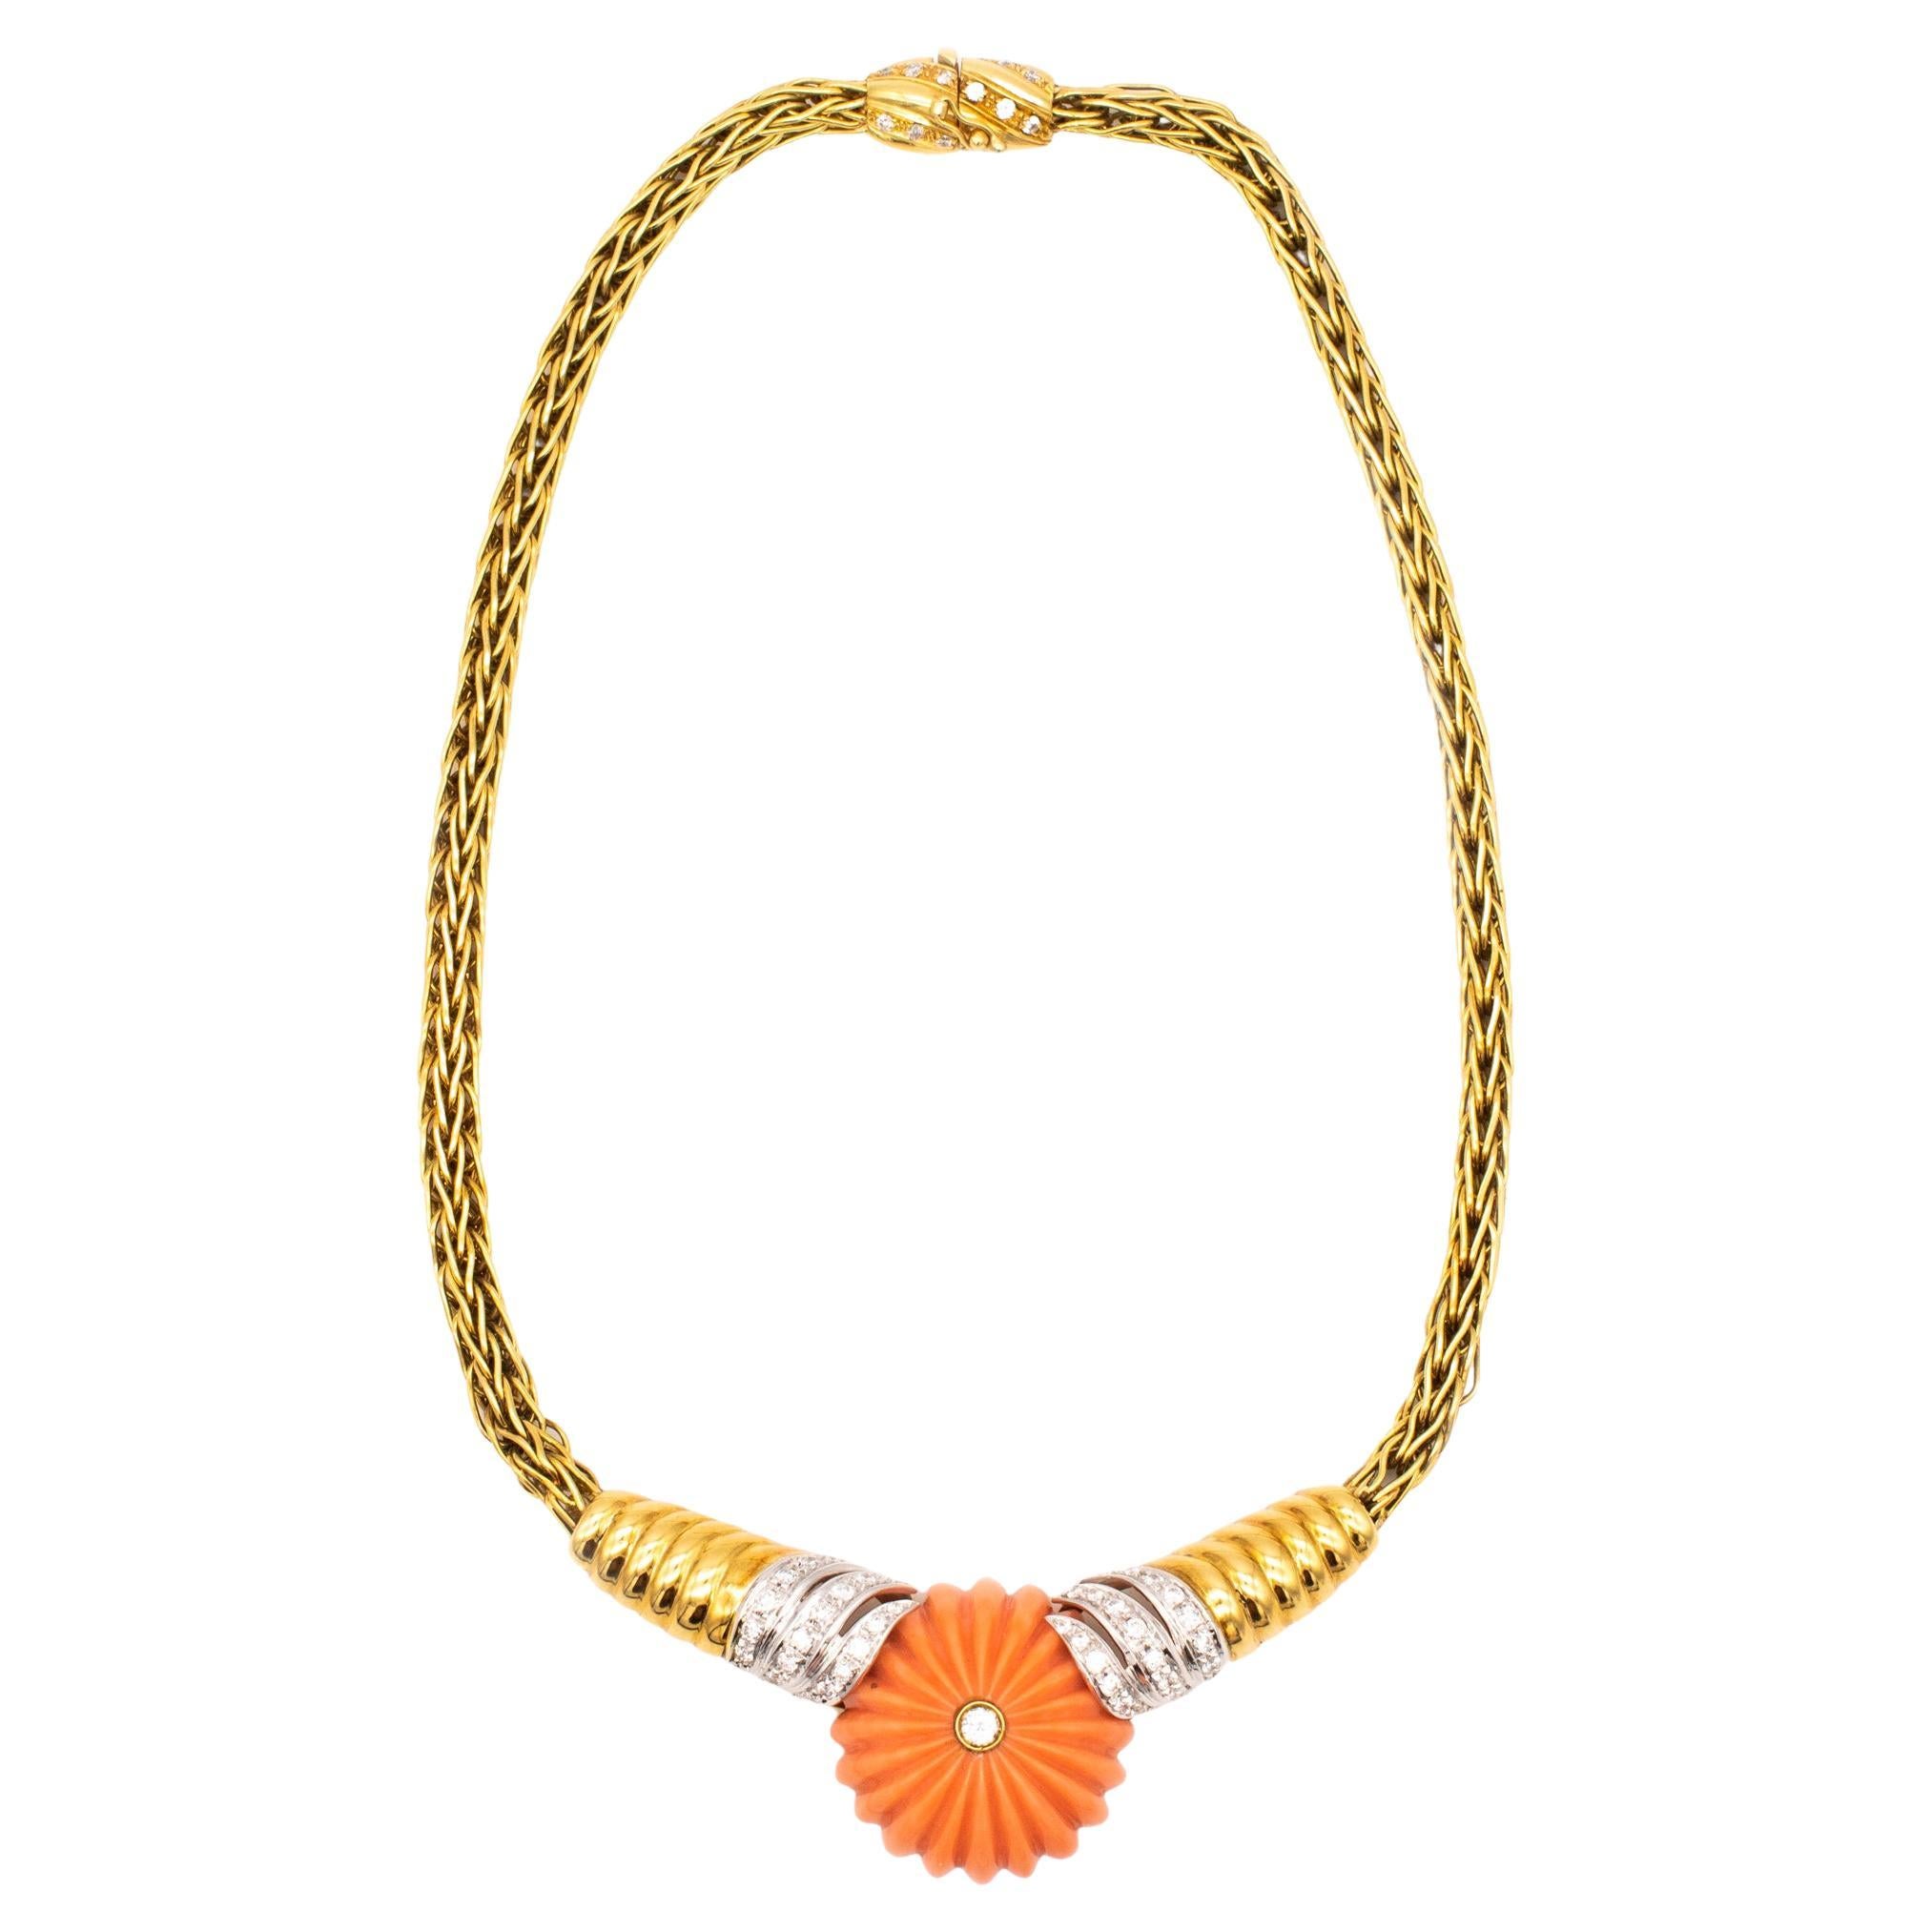 Spritzer and Fuhrmann 18Kt Gold Necklace with 3.10 Cts in Diamonds and Coral